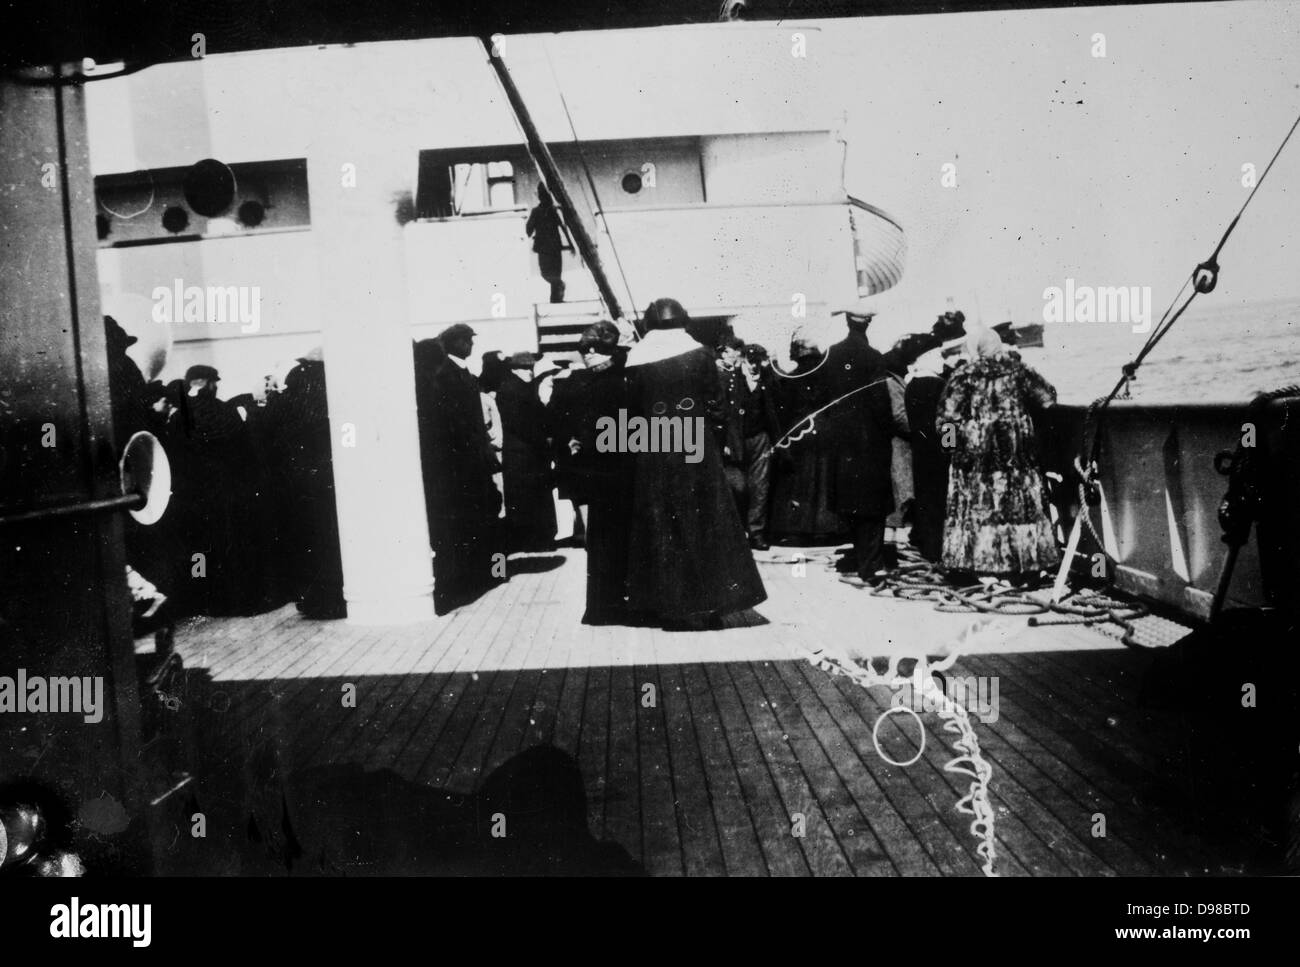 Survivors of TITANIC on CARPATHIA. Date Created/Published: [1912 April]. Summary: Photo related to the disaster of the RMS TITANIC, which struck an iceberg in April 1912 and sank, killing more than 1,500 people. Stock Photo